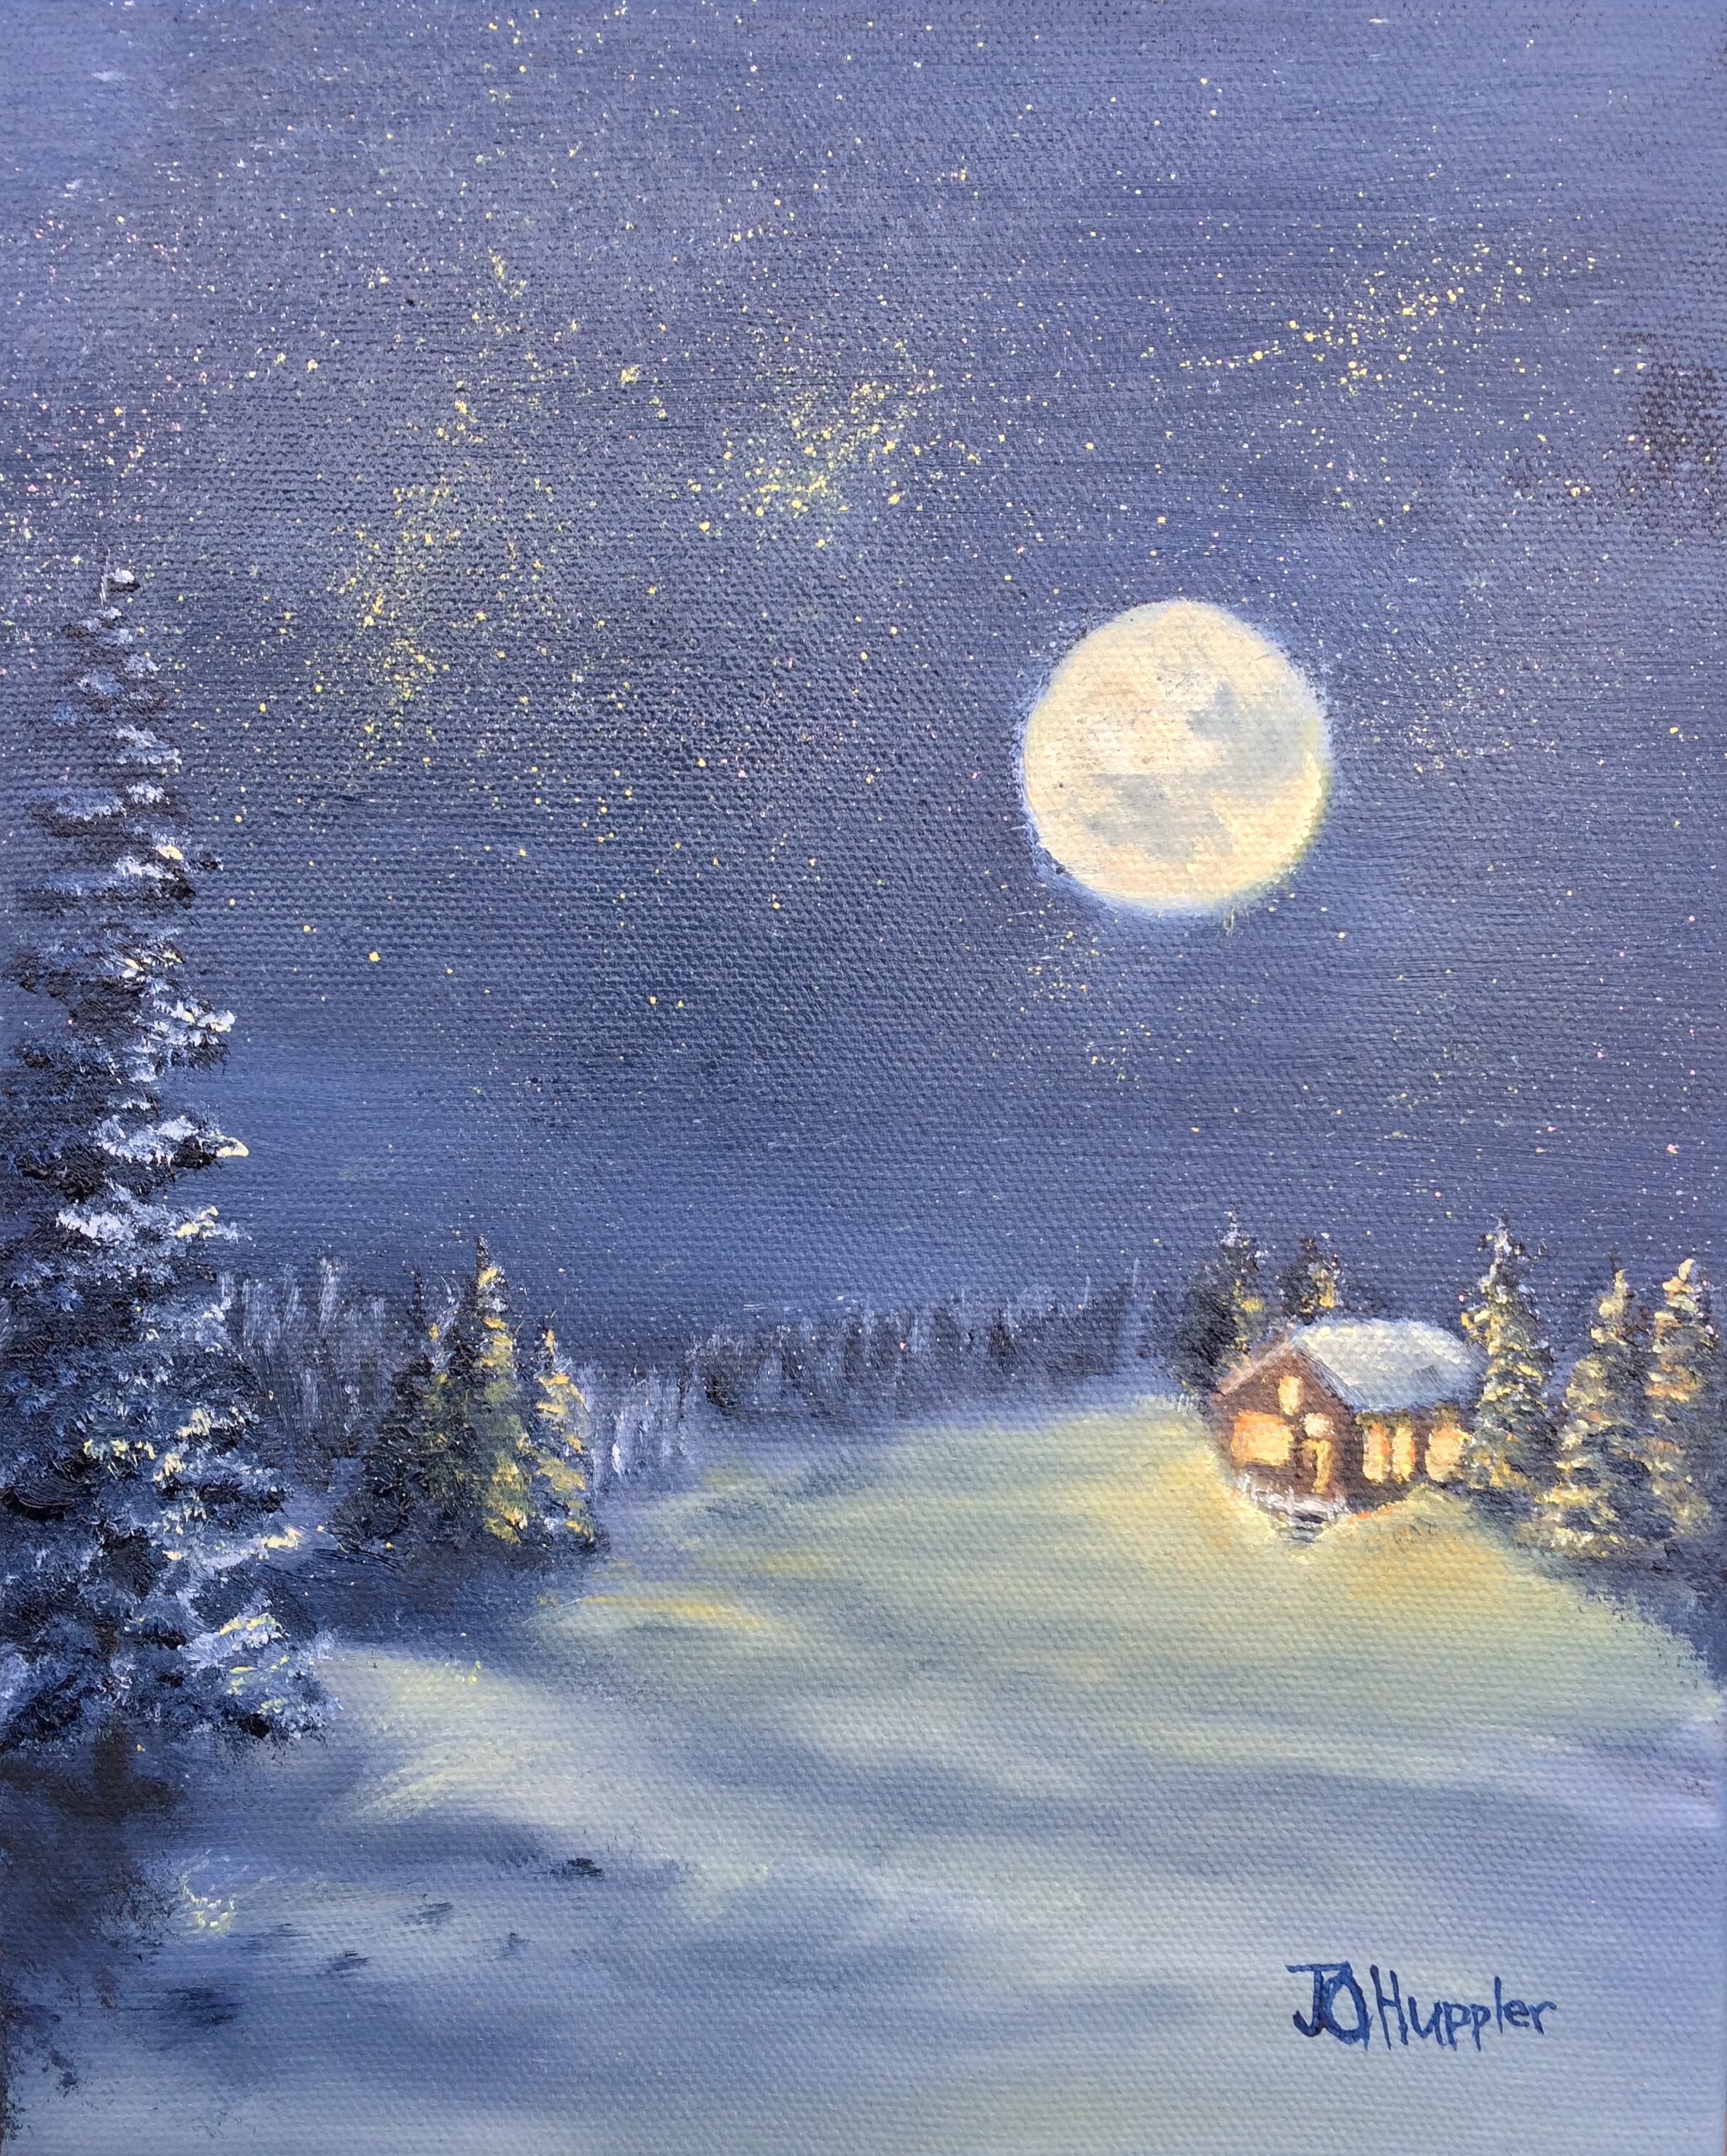 How To Paint Snowy Mountains In Moonlight